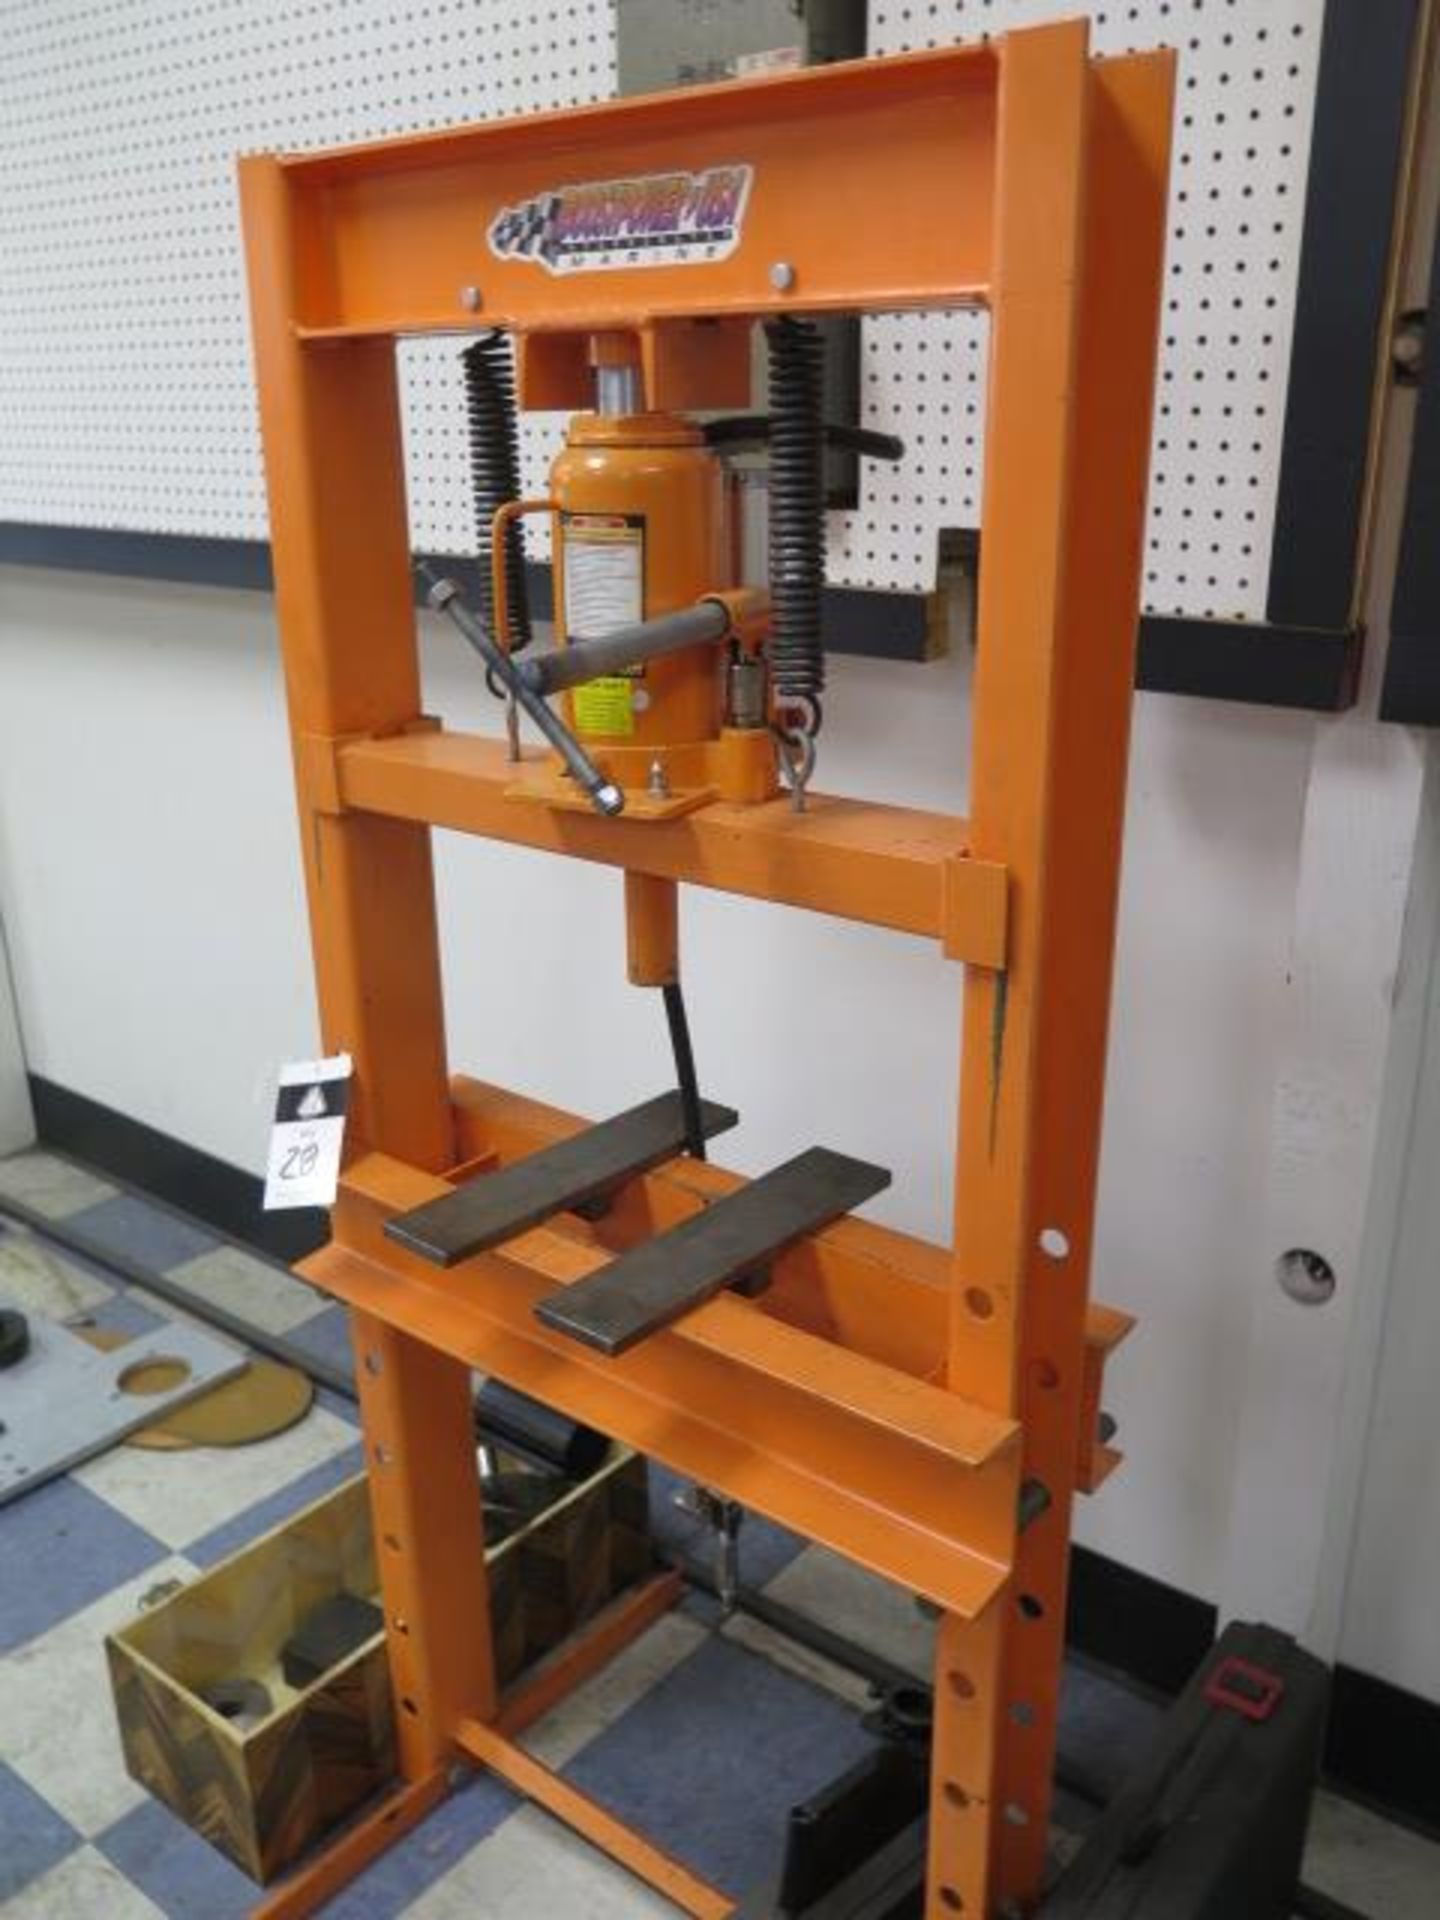 20 Ton Hydraulic H-Frame Press (SOLD AS-IS - NO WARRANTY) - Image 2 of 6